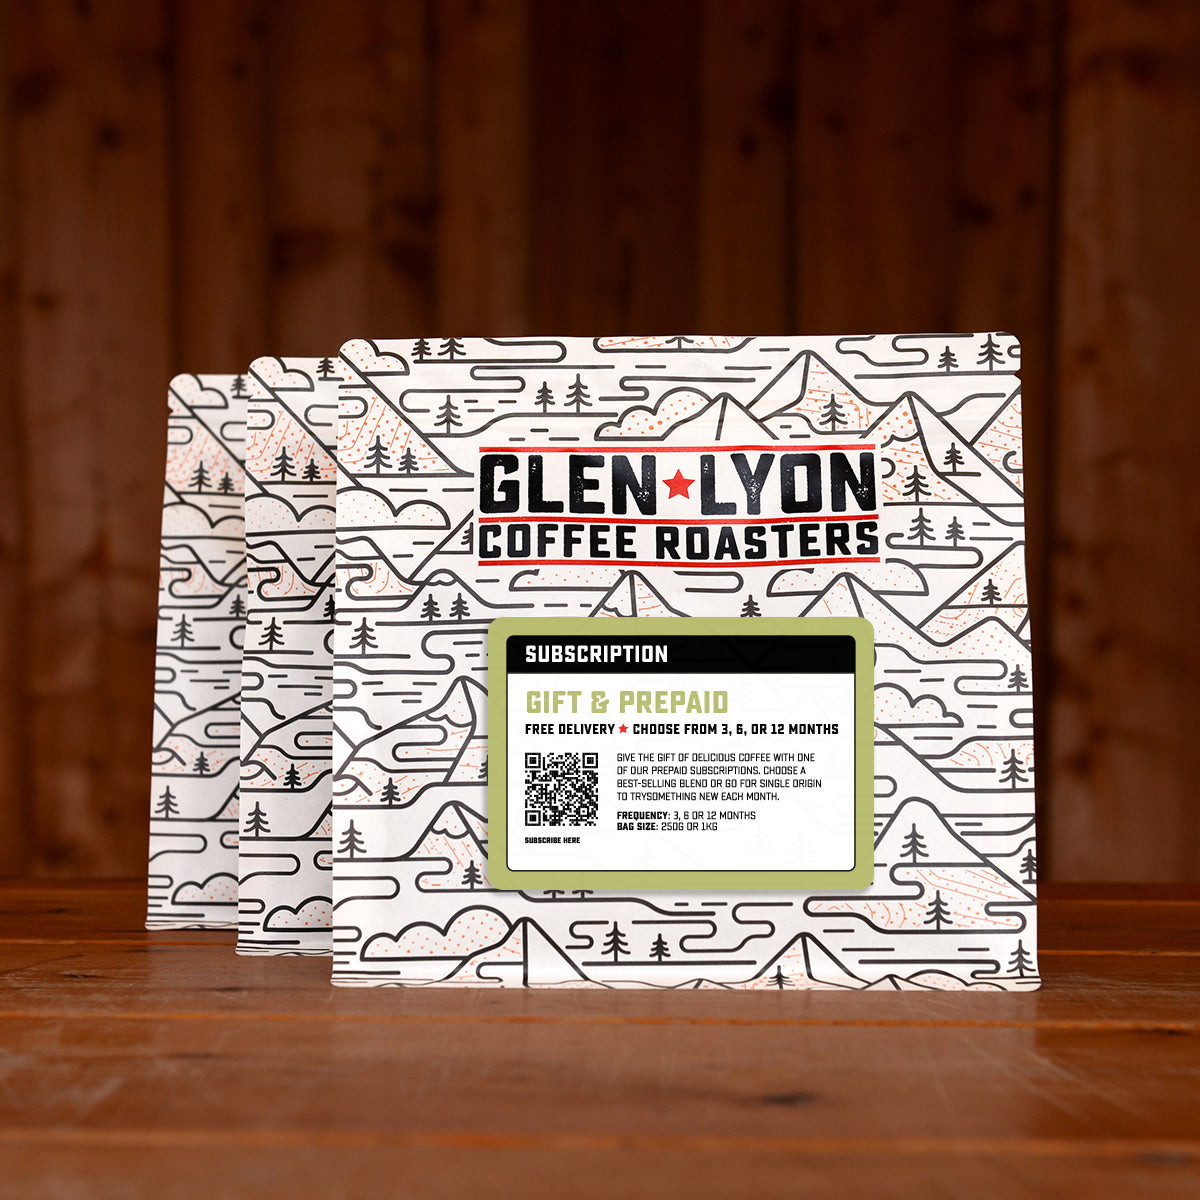 3 bags of gift and prepaid subscription labelled speciality coffee from Glen Lyon Coffee Roasters against a warm wood-tinged background